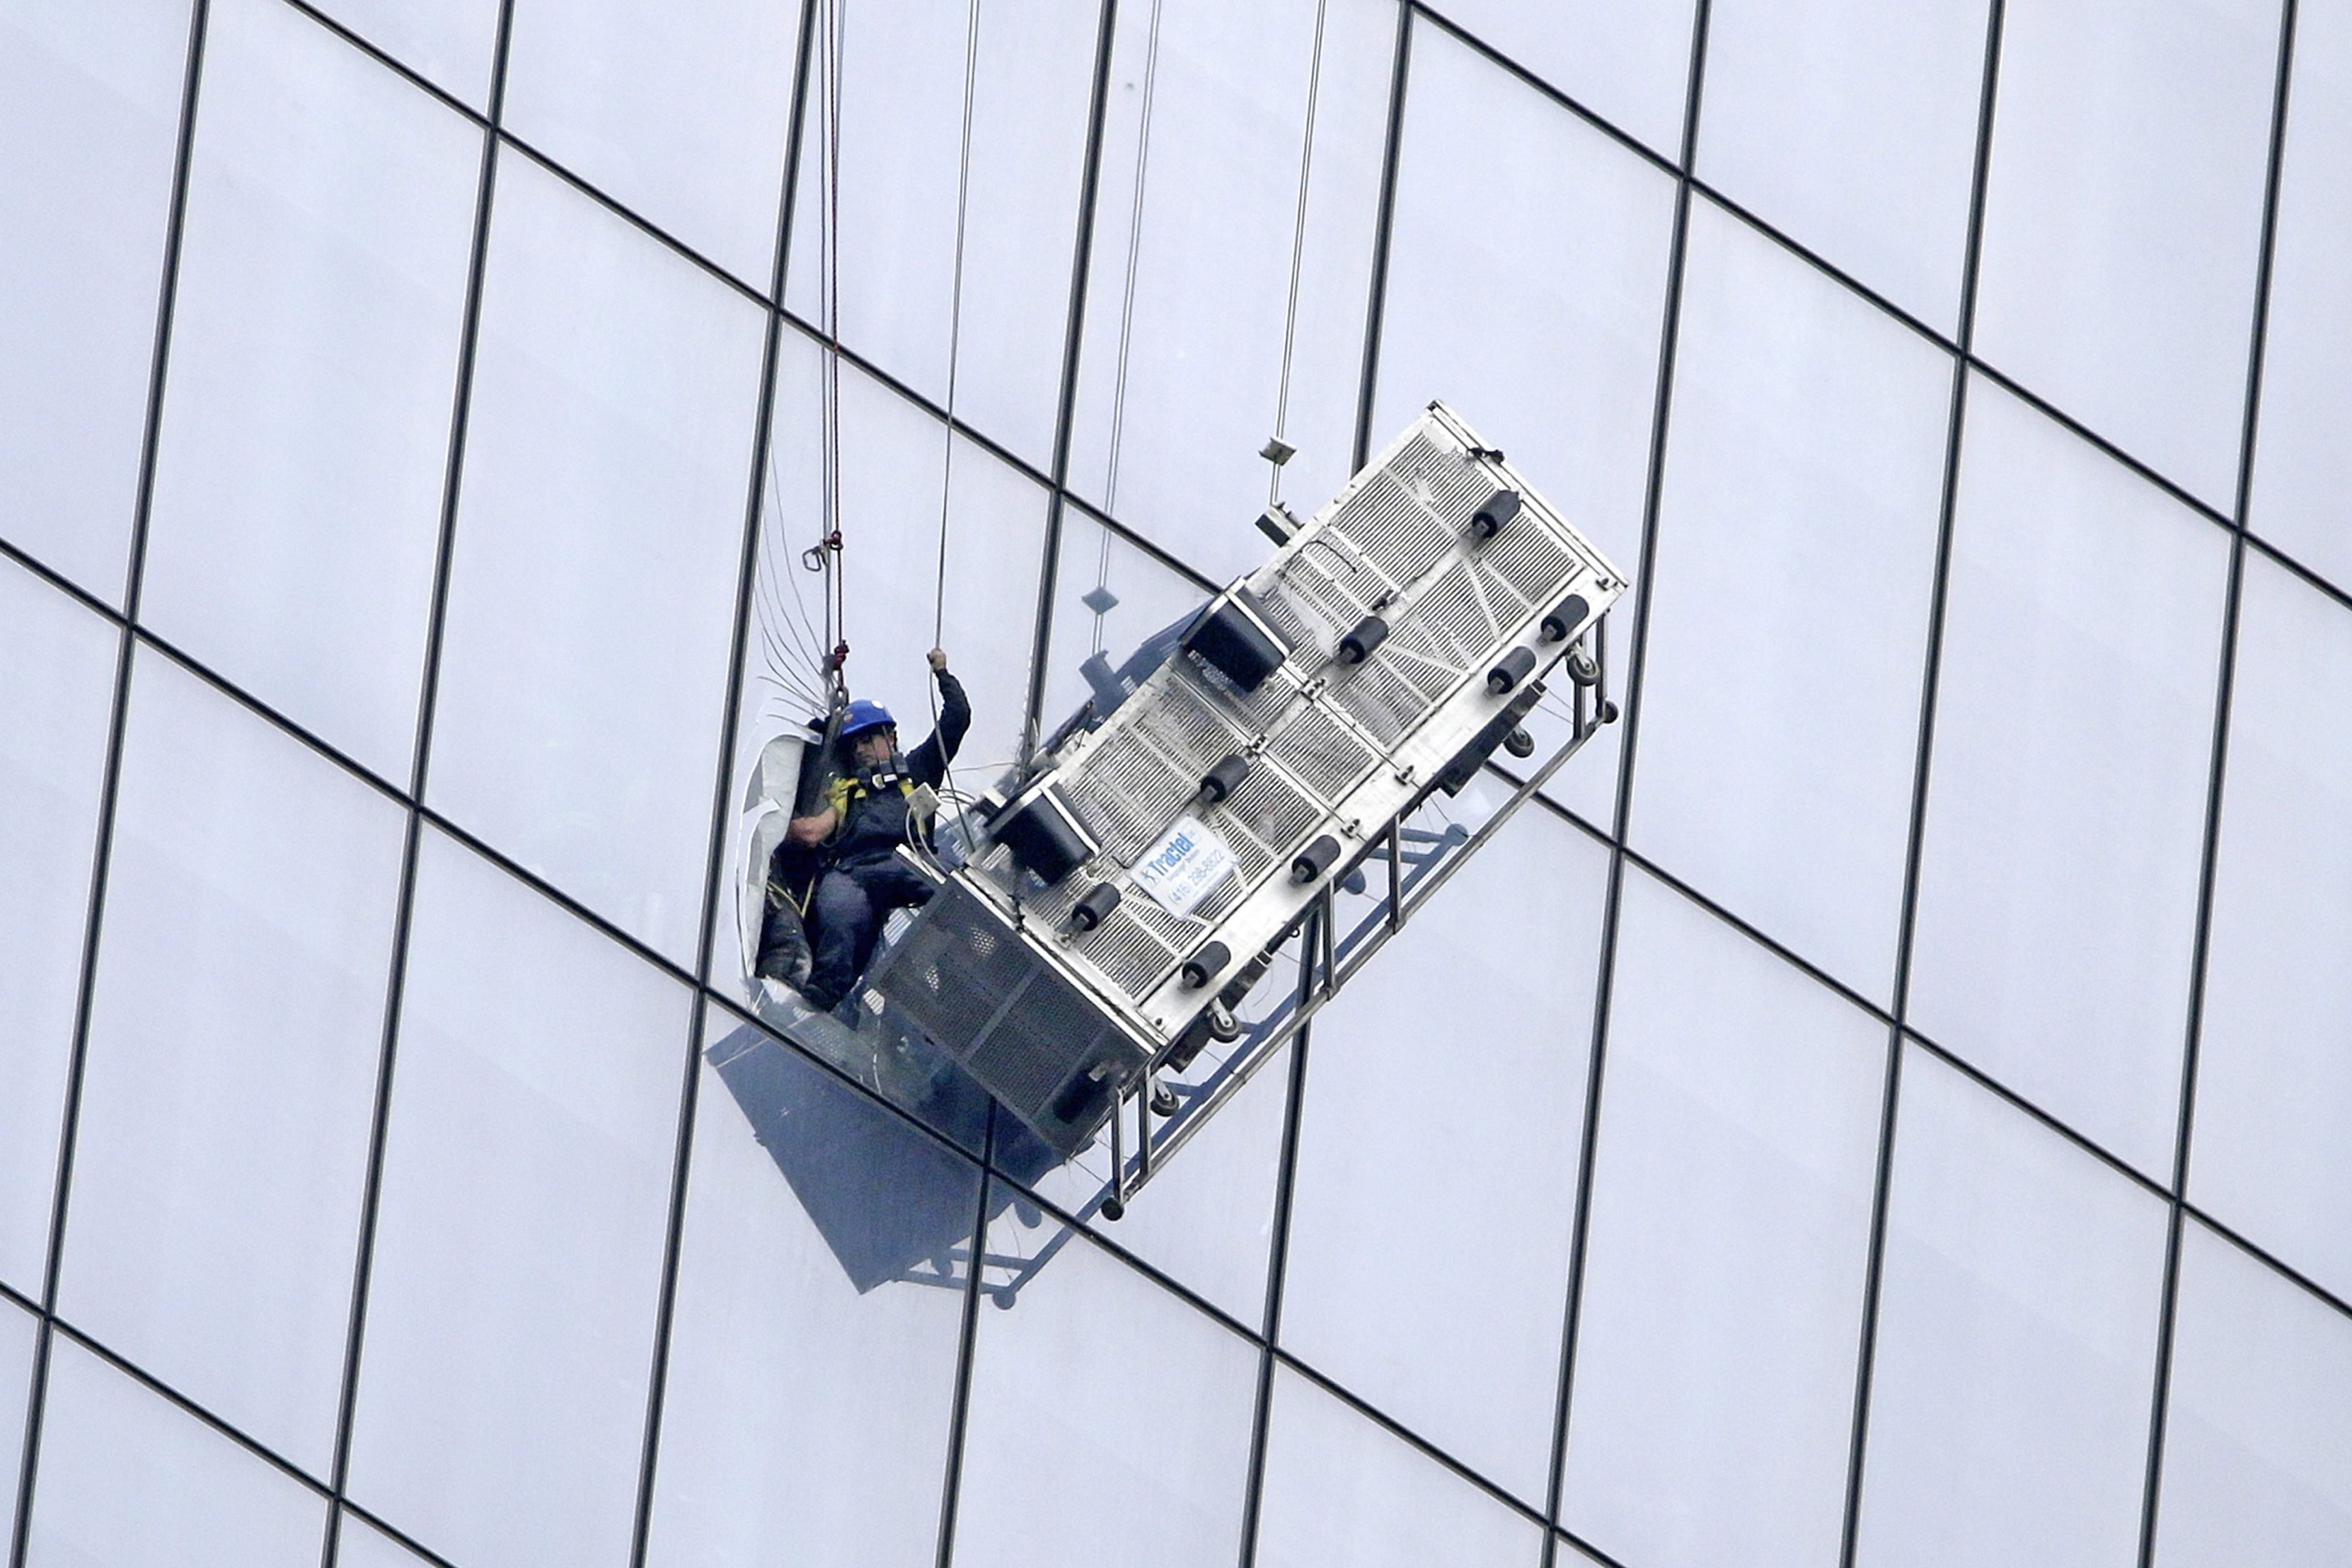 A window washer is seen being rescued by NYPD and NYFD  after his carriage came dislodged from his cables along side the One World Trade Center in New YorkCity on Nov. 12, 2014. (Jason Szenes—EPA)